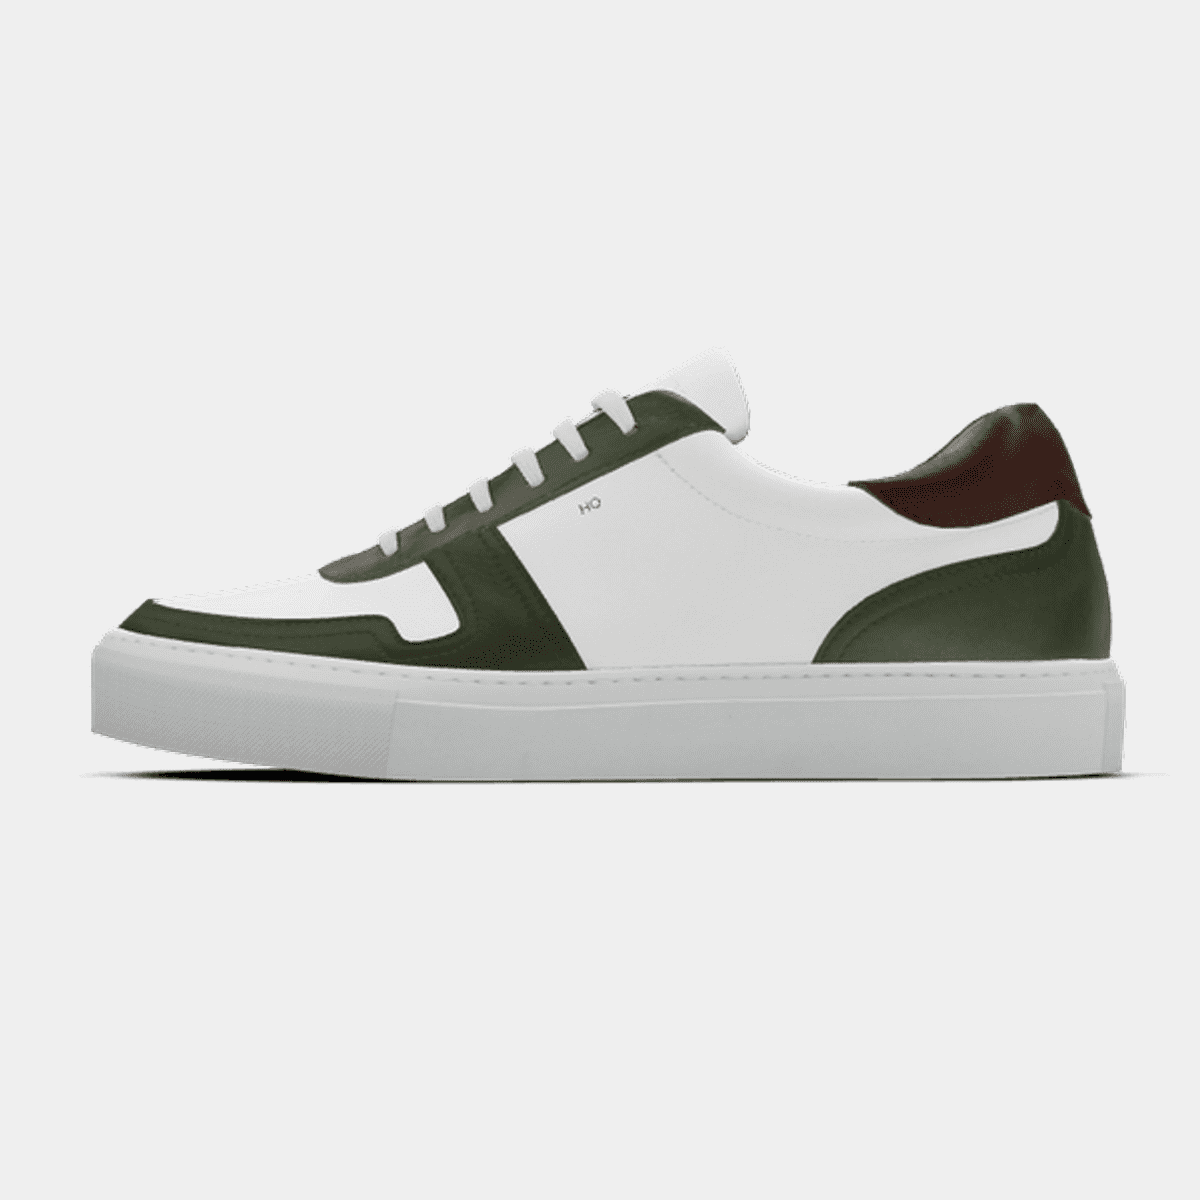 Green, white & brown leather Sneakers